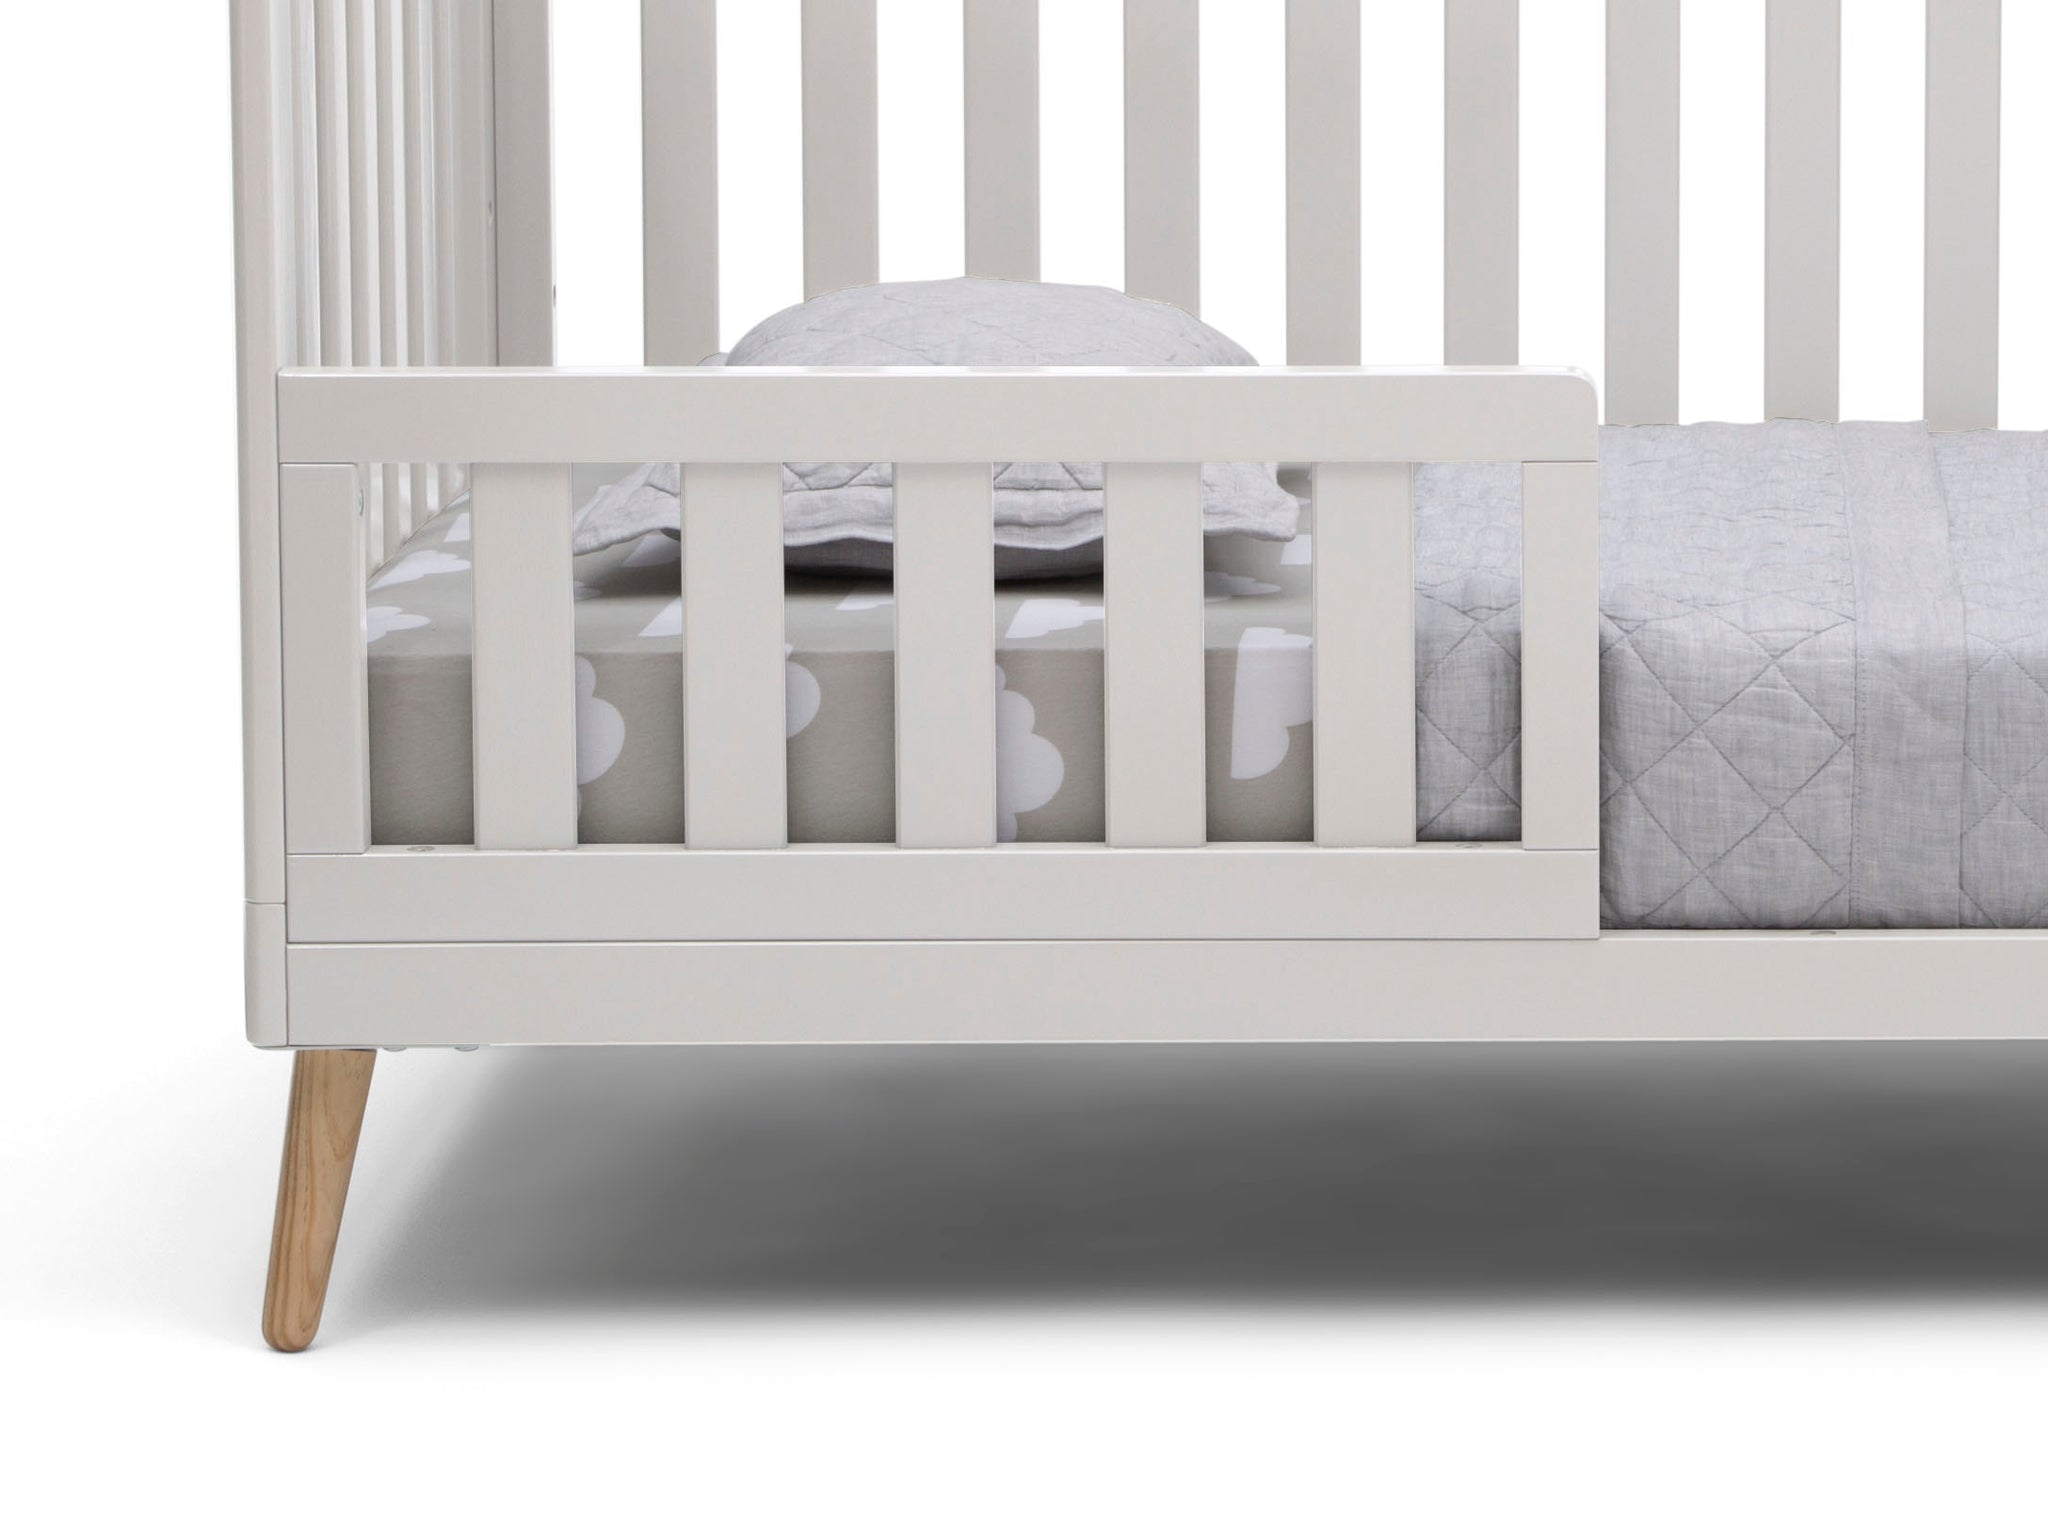 crib convert to twin bed